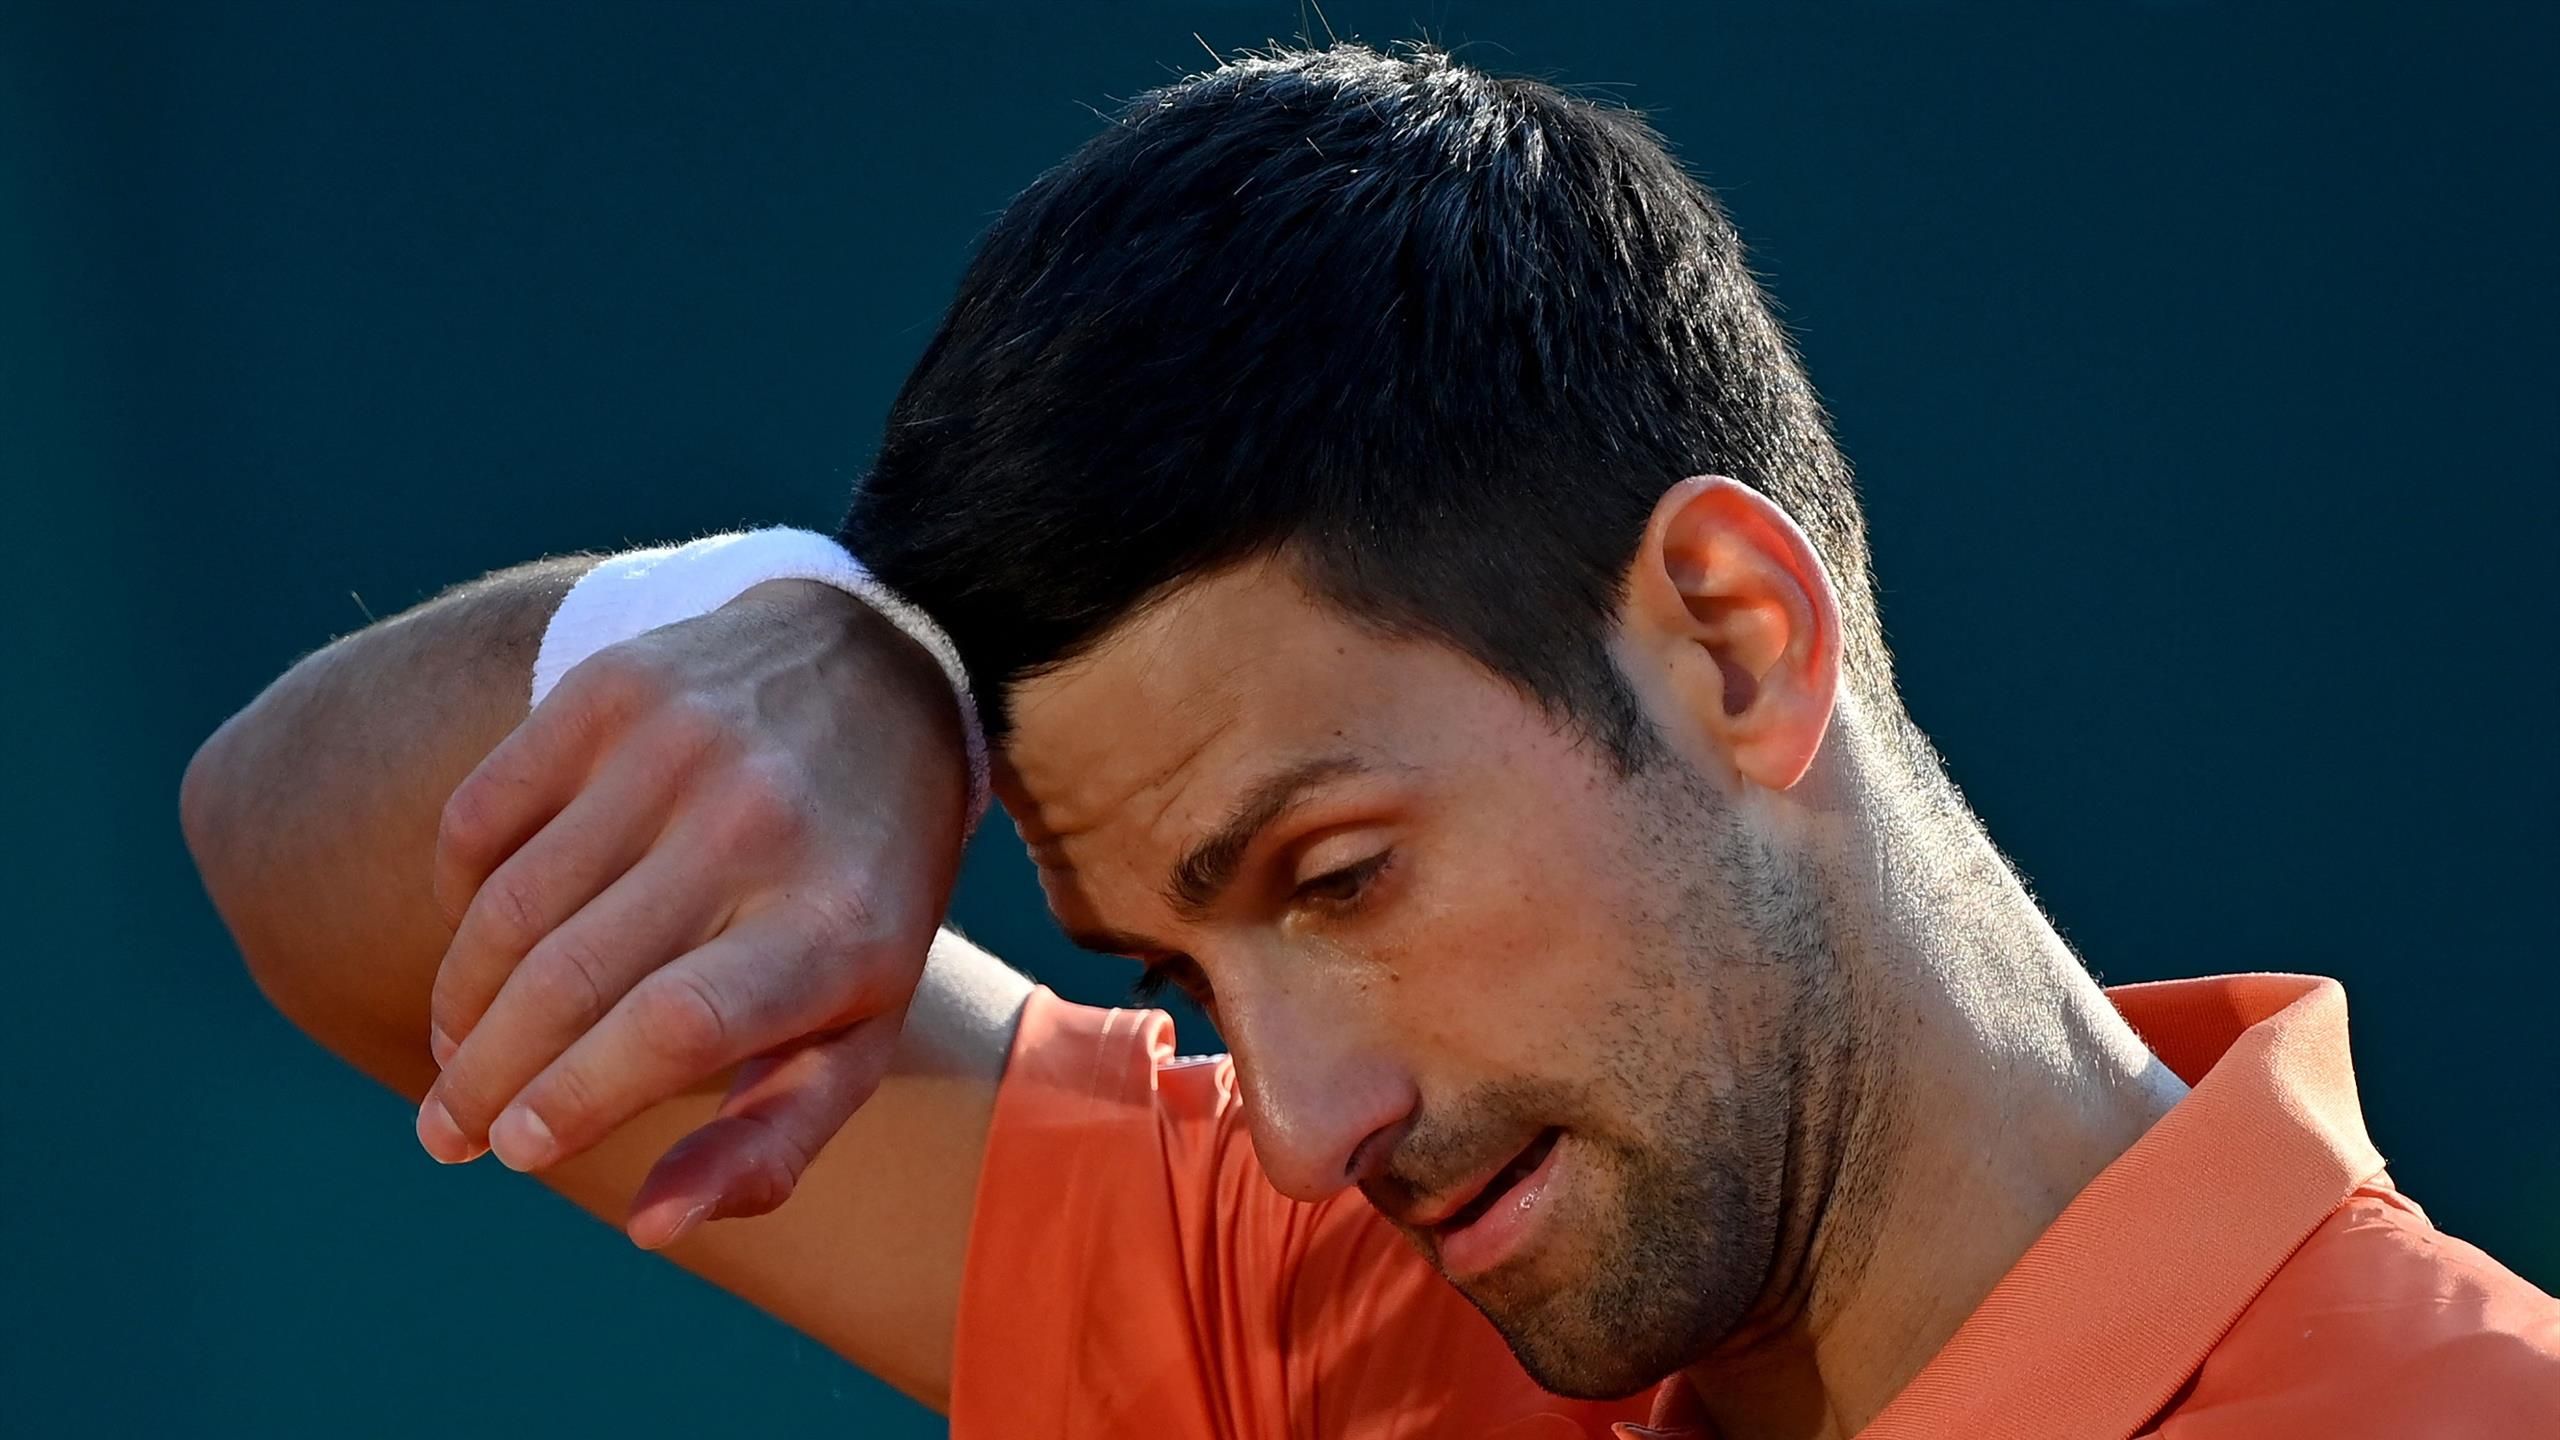 Laslo Djere is not a test for compatriot Novak Djokovic at 2023 US Open in third round match, claims Justine Henin